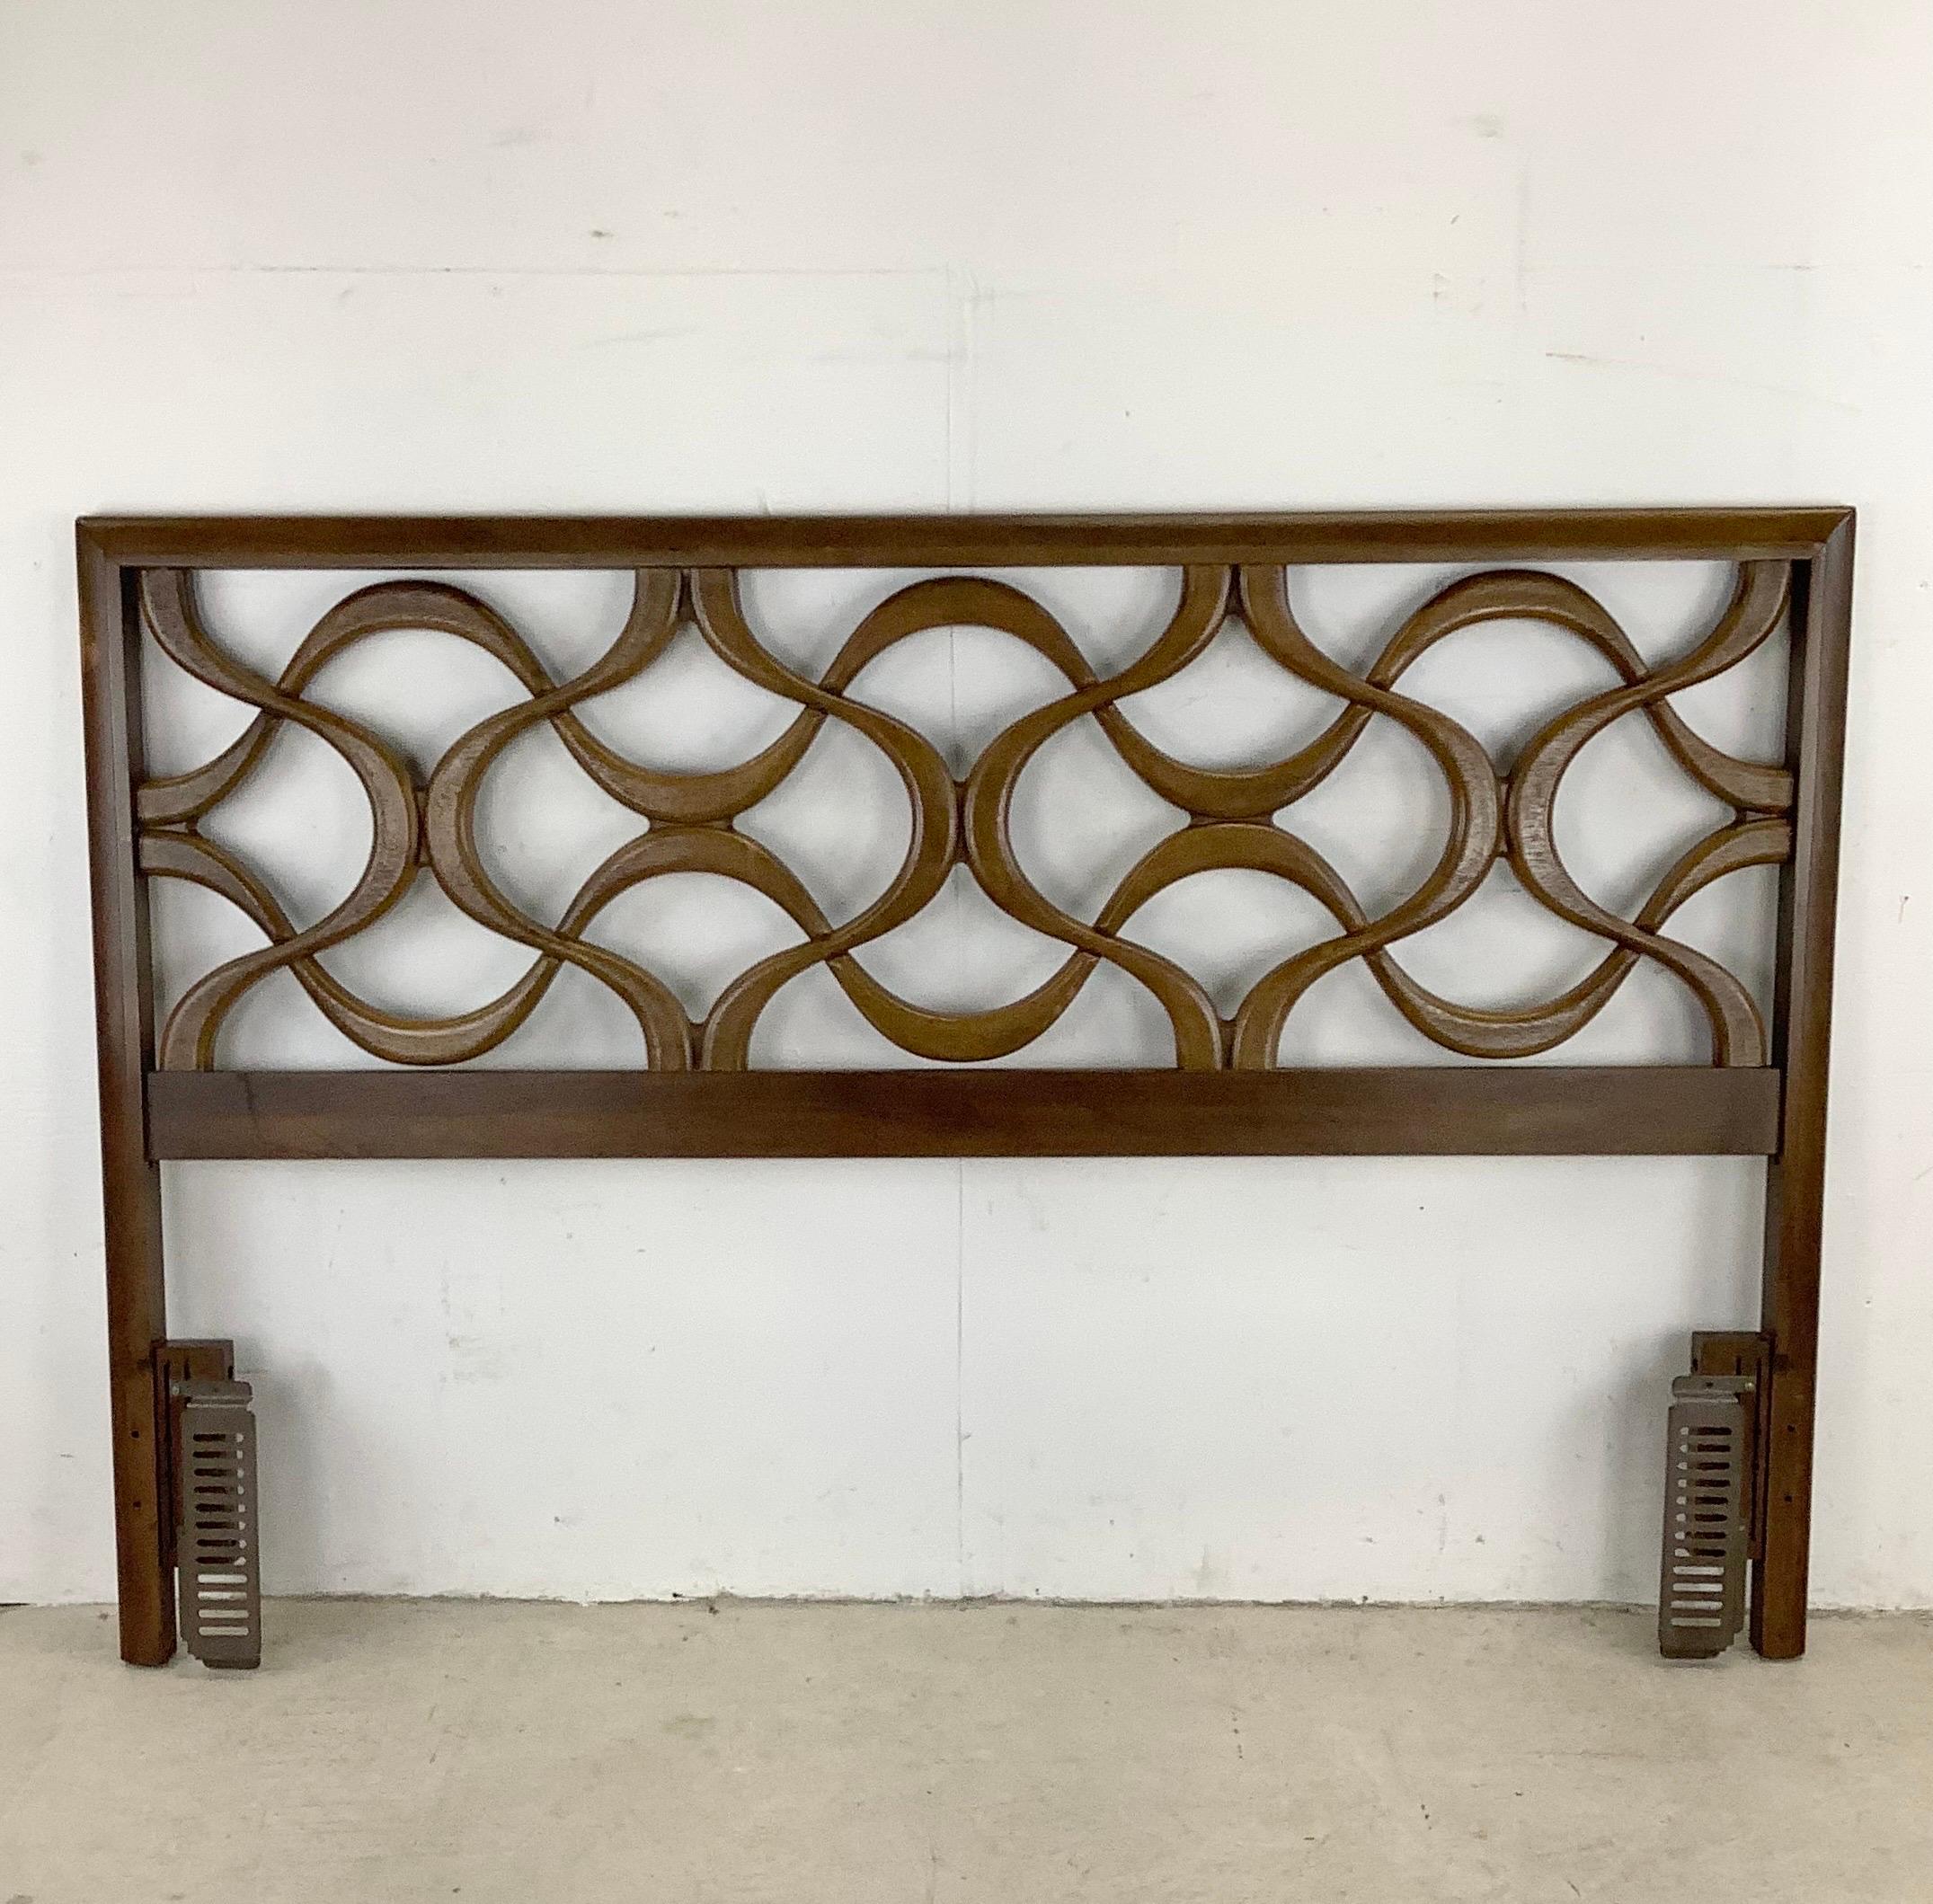 This striking vintage modern headboard features a dark walnut tone and applied front sculptural detail. The uniquely decorative vintage style of this mid-century headboard make it a subtle yet stylish centerpiece to any bedroom and at sixty inches